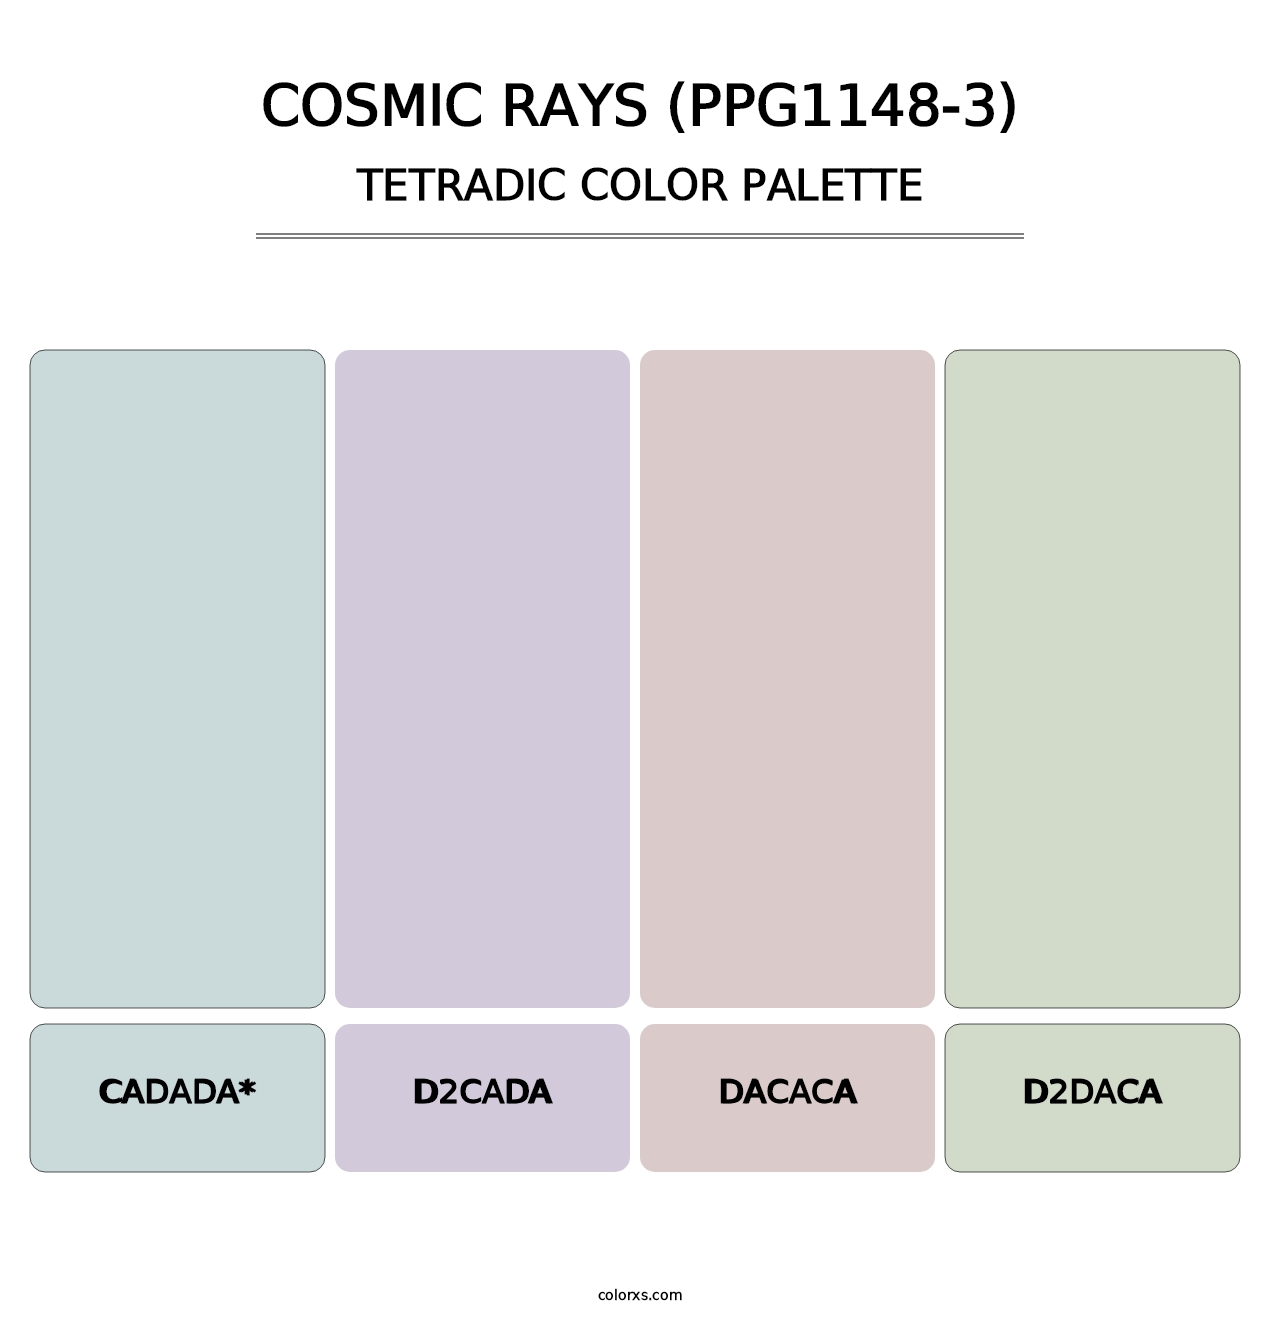 Cosmic Rays (PPG1148-3) - Tetradic Color Palette